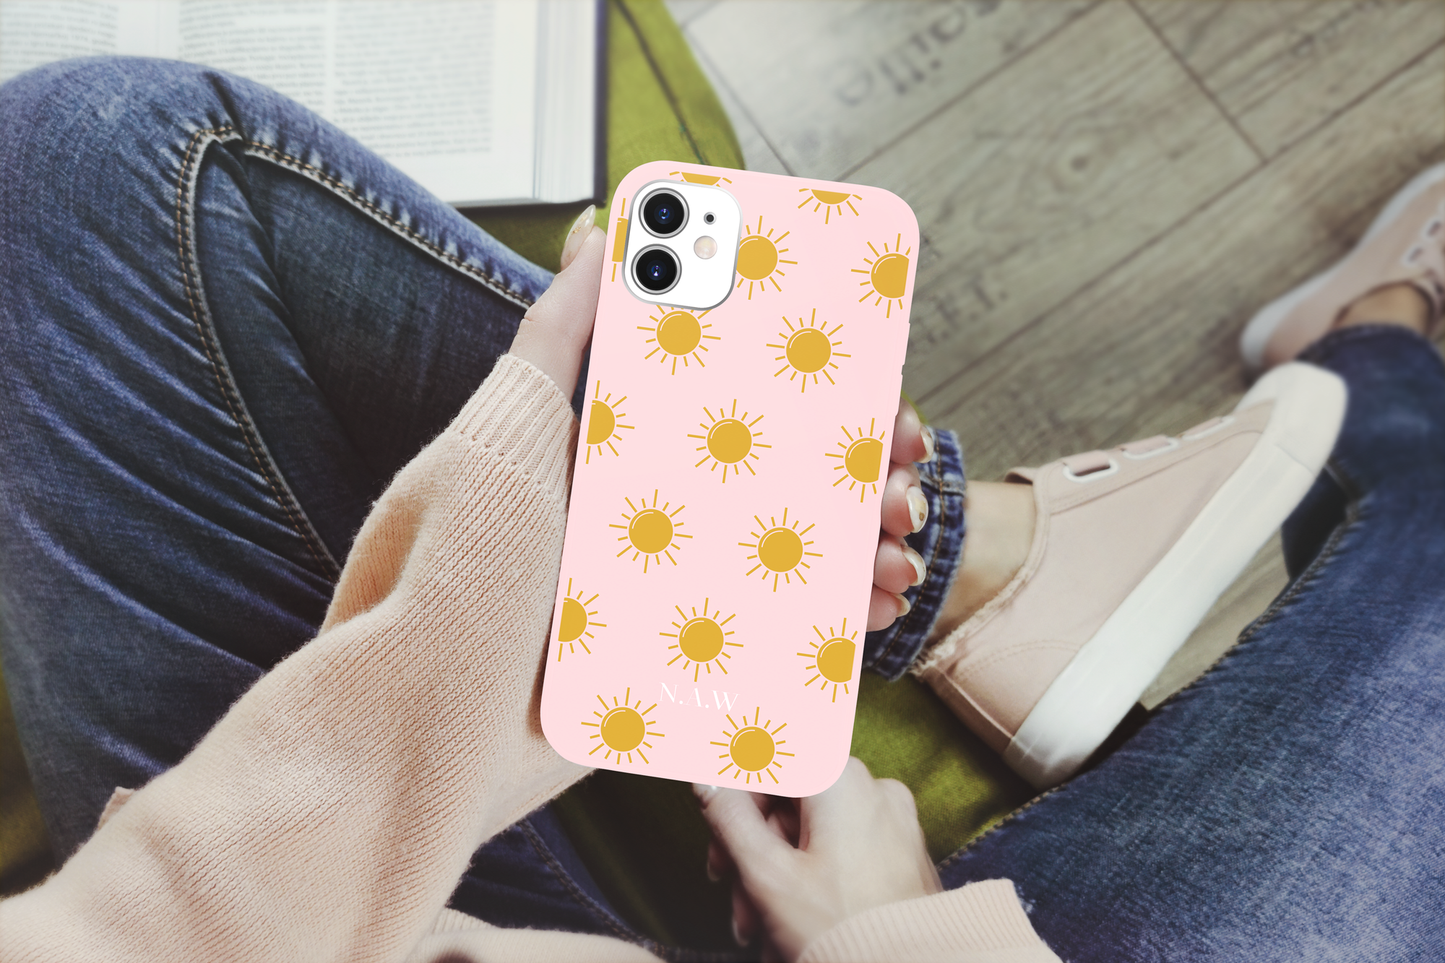 Sun Phone Cases - Apple and Android